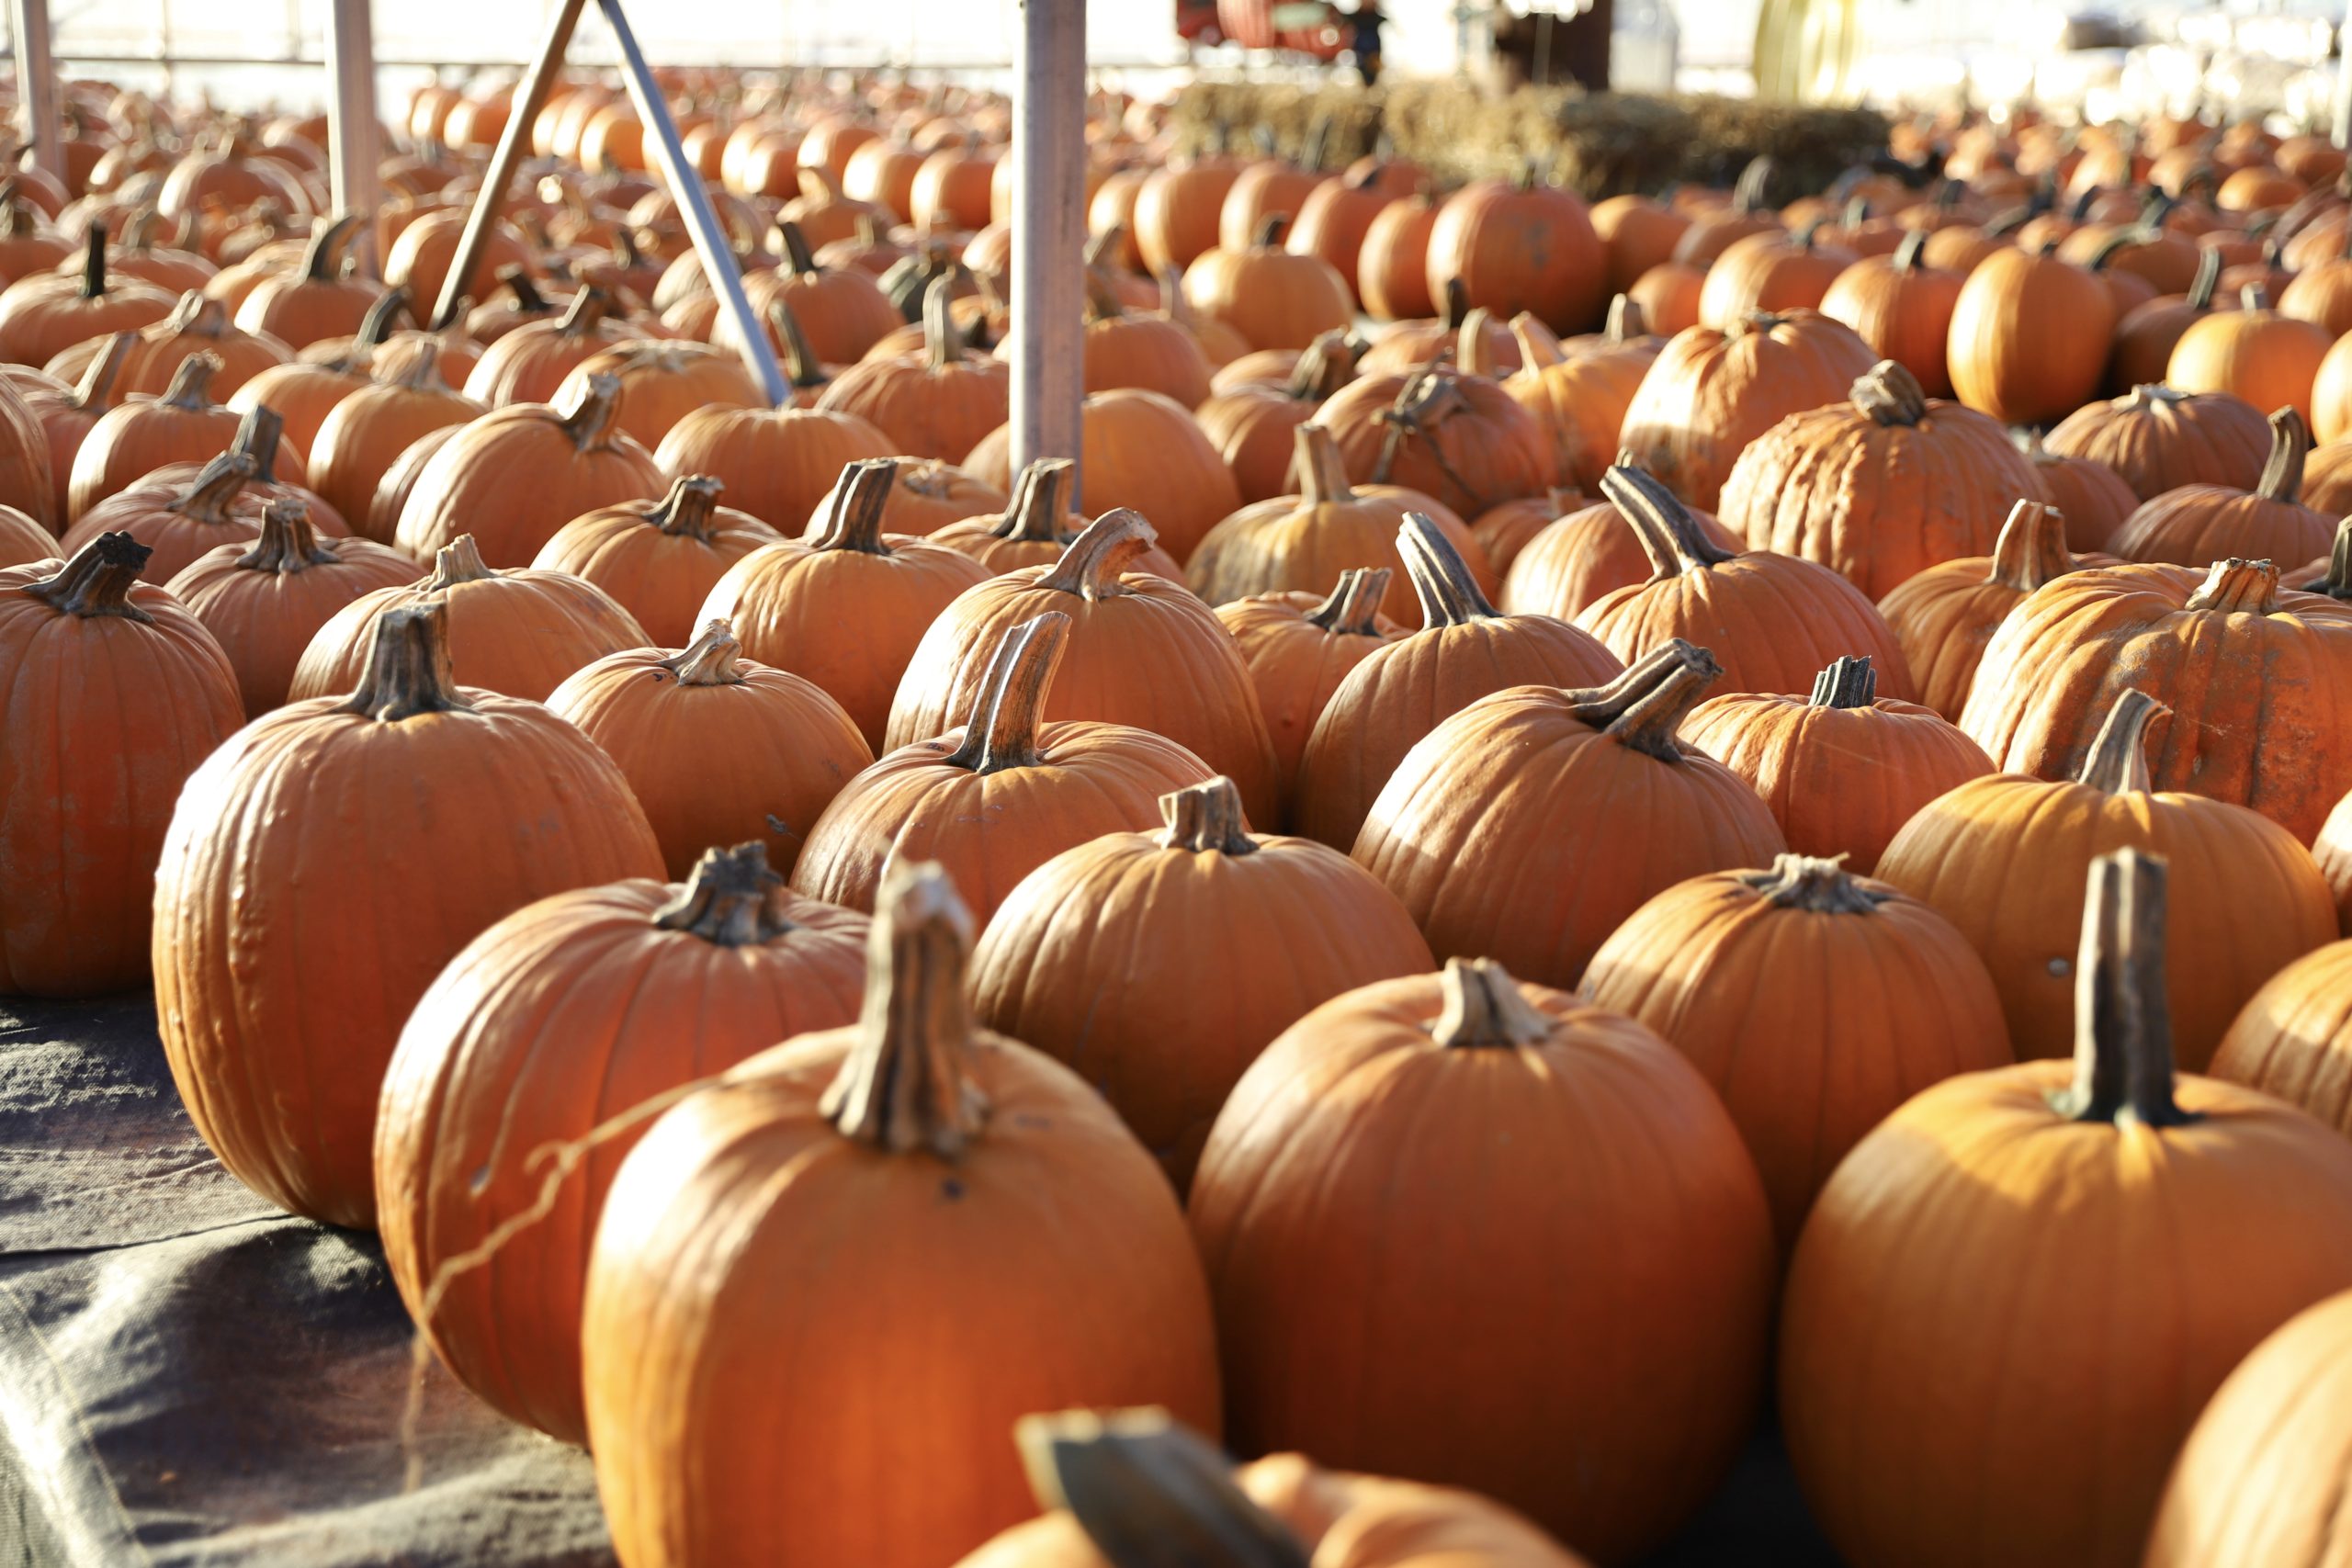 Read more about the article Pumpkins, Corn Pits & Fall Activities in Stillwater, Minnesota